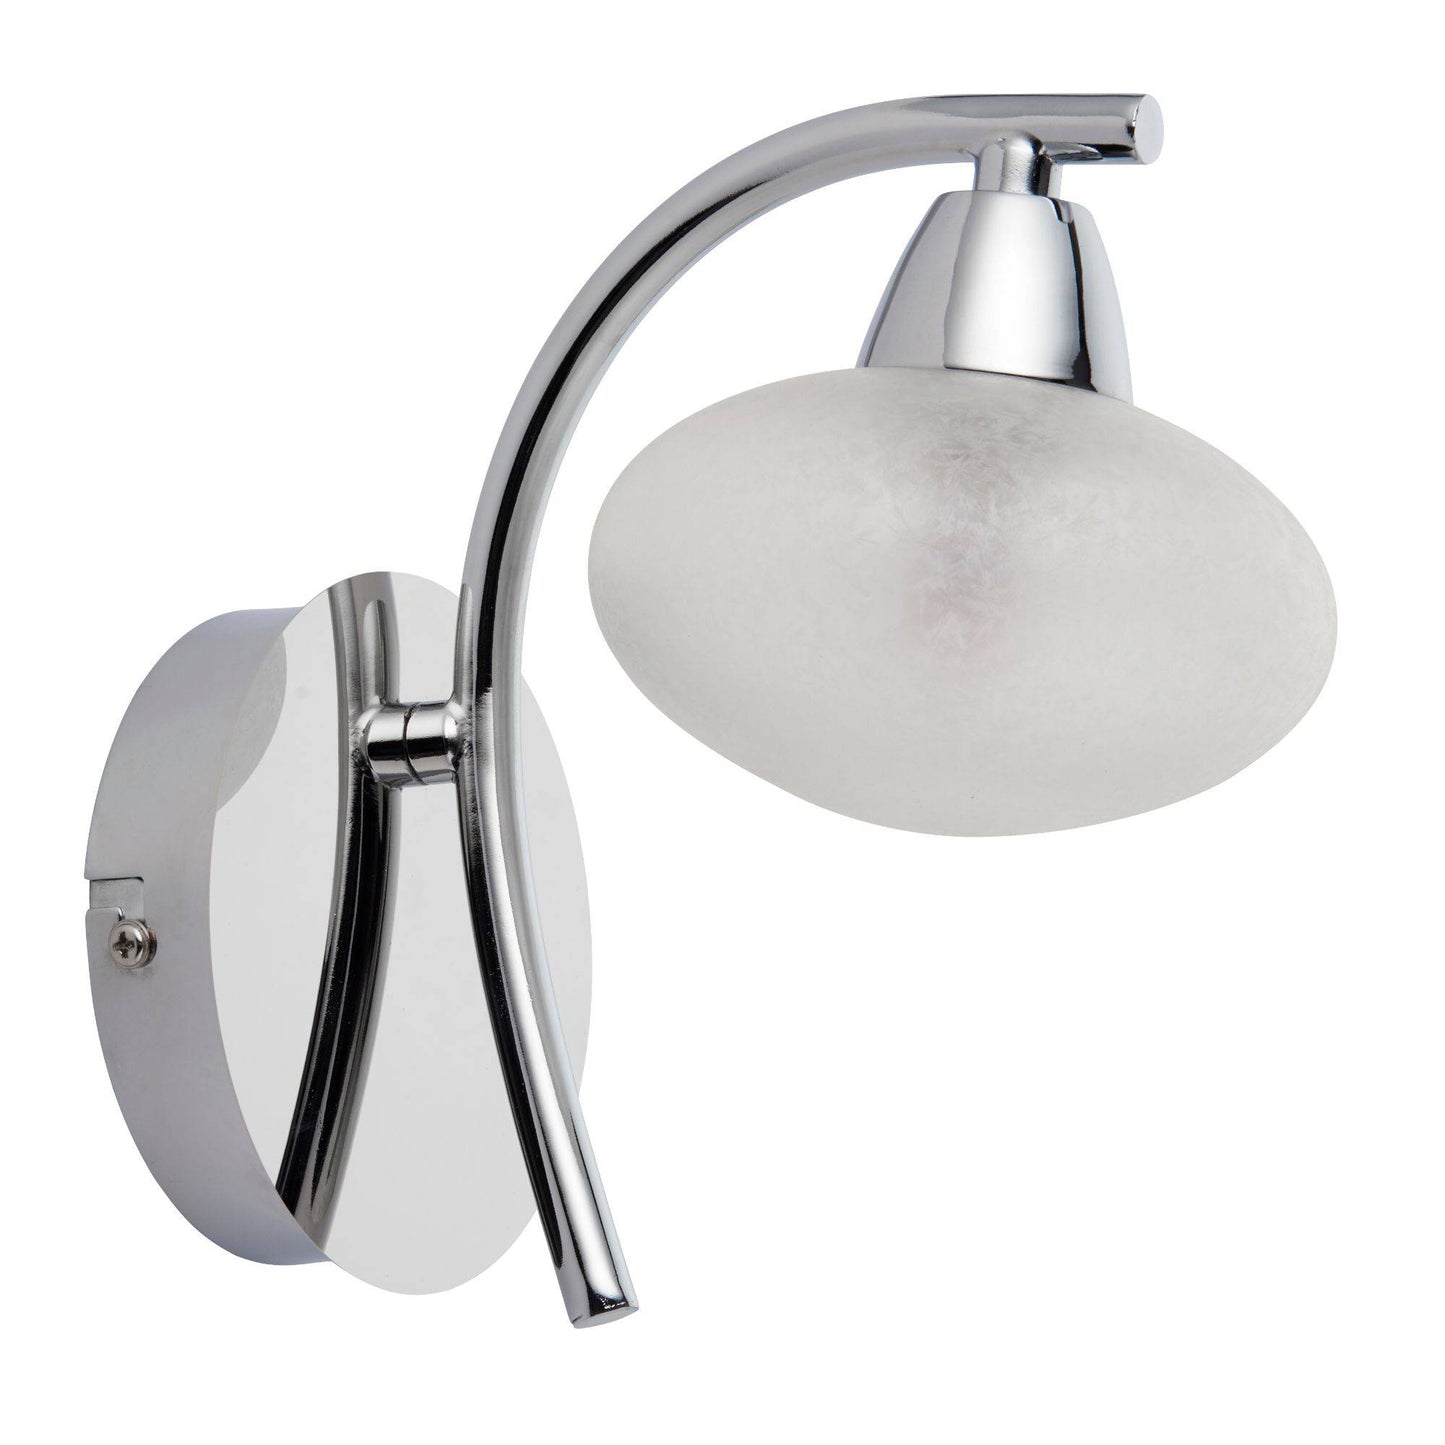 Sion 1 Light Polished Chrome Indoor Wall Light with a Frosted Glass Shade